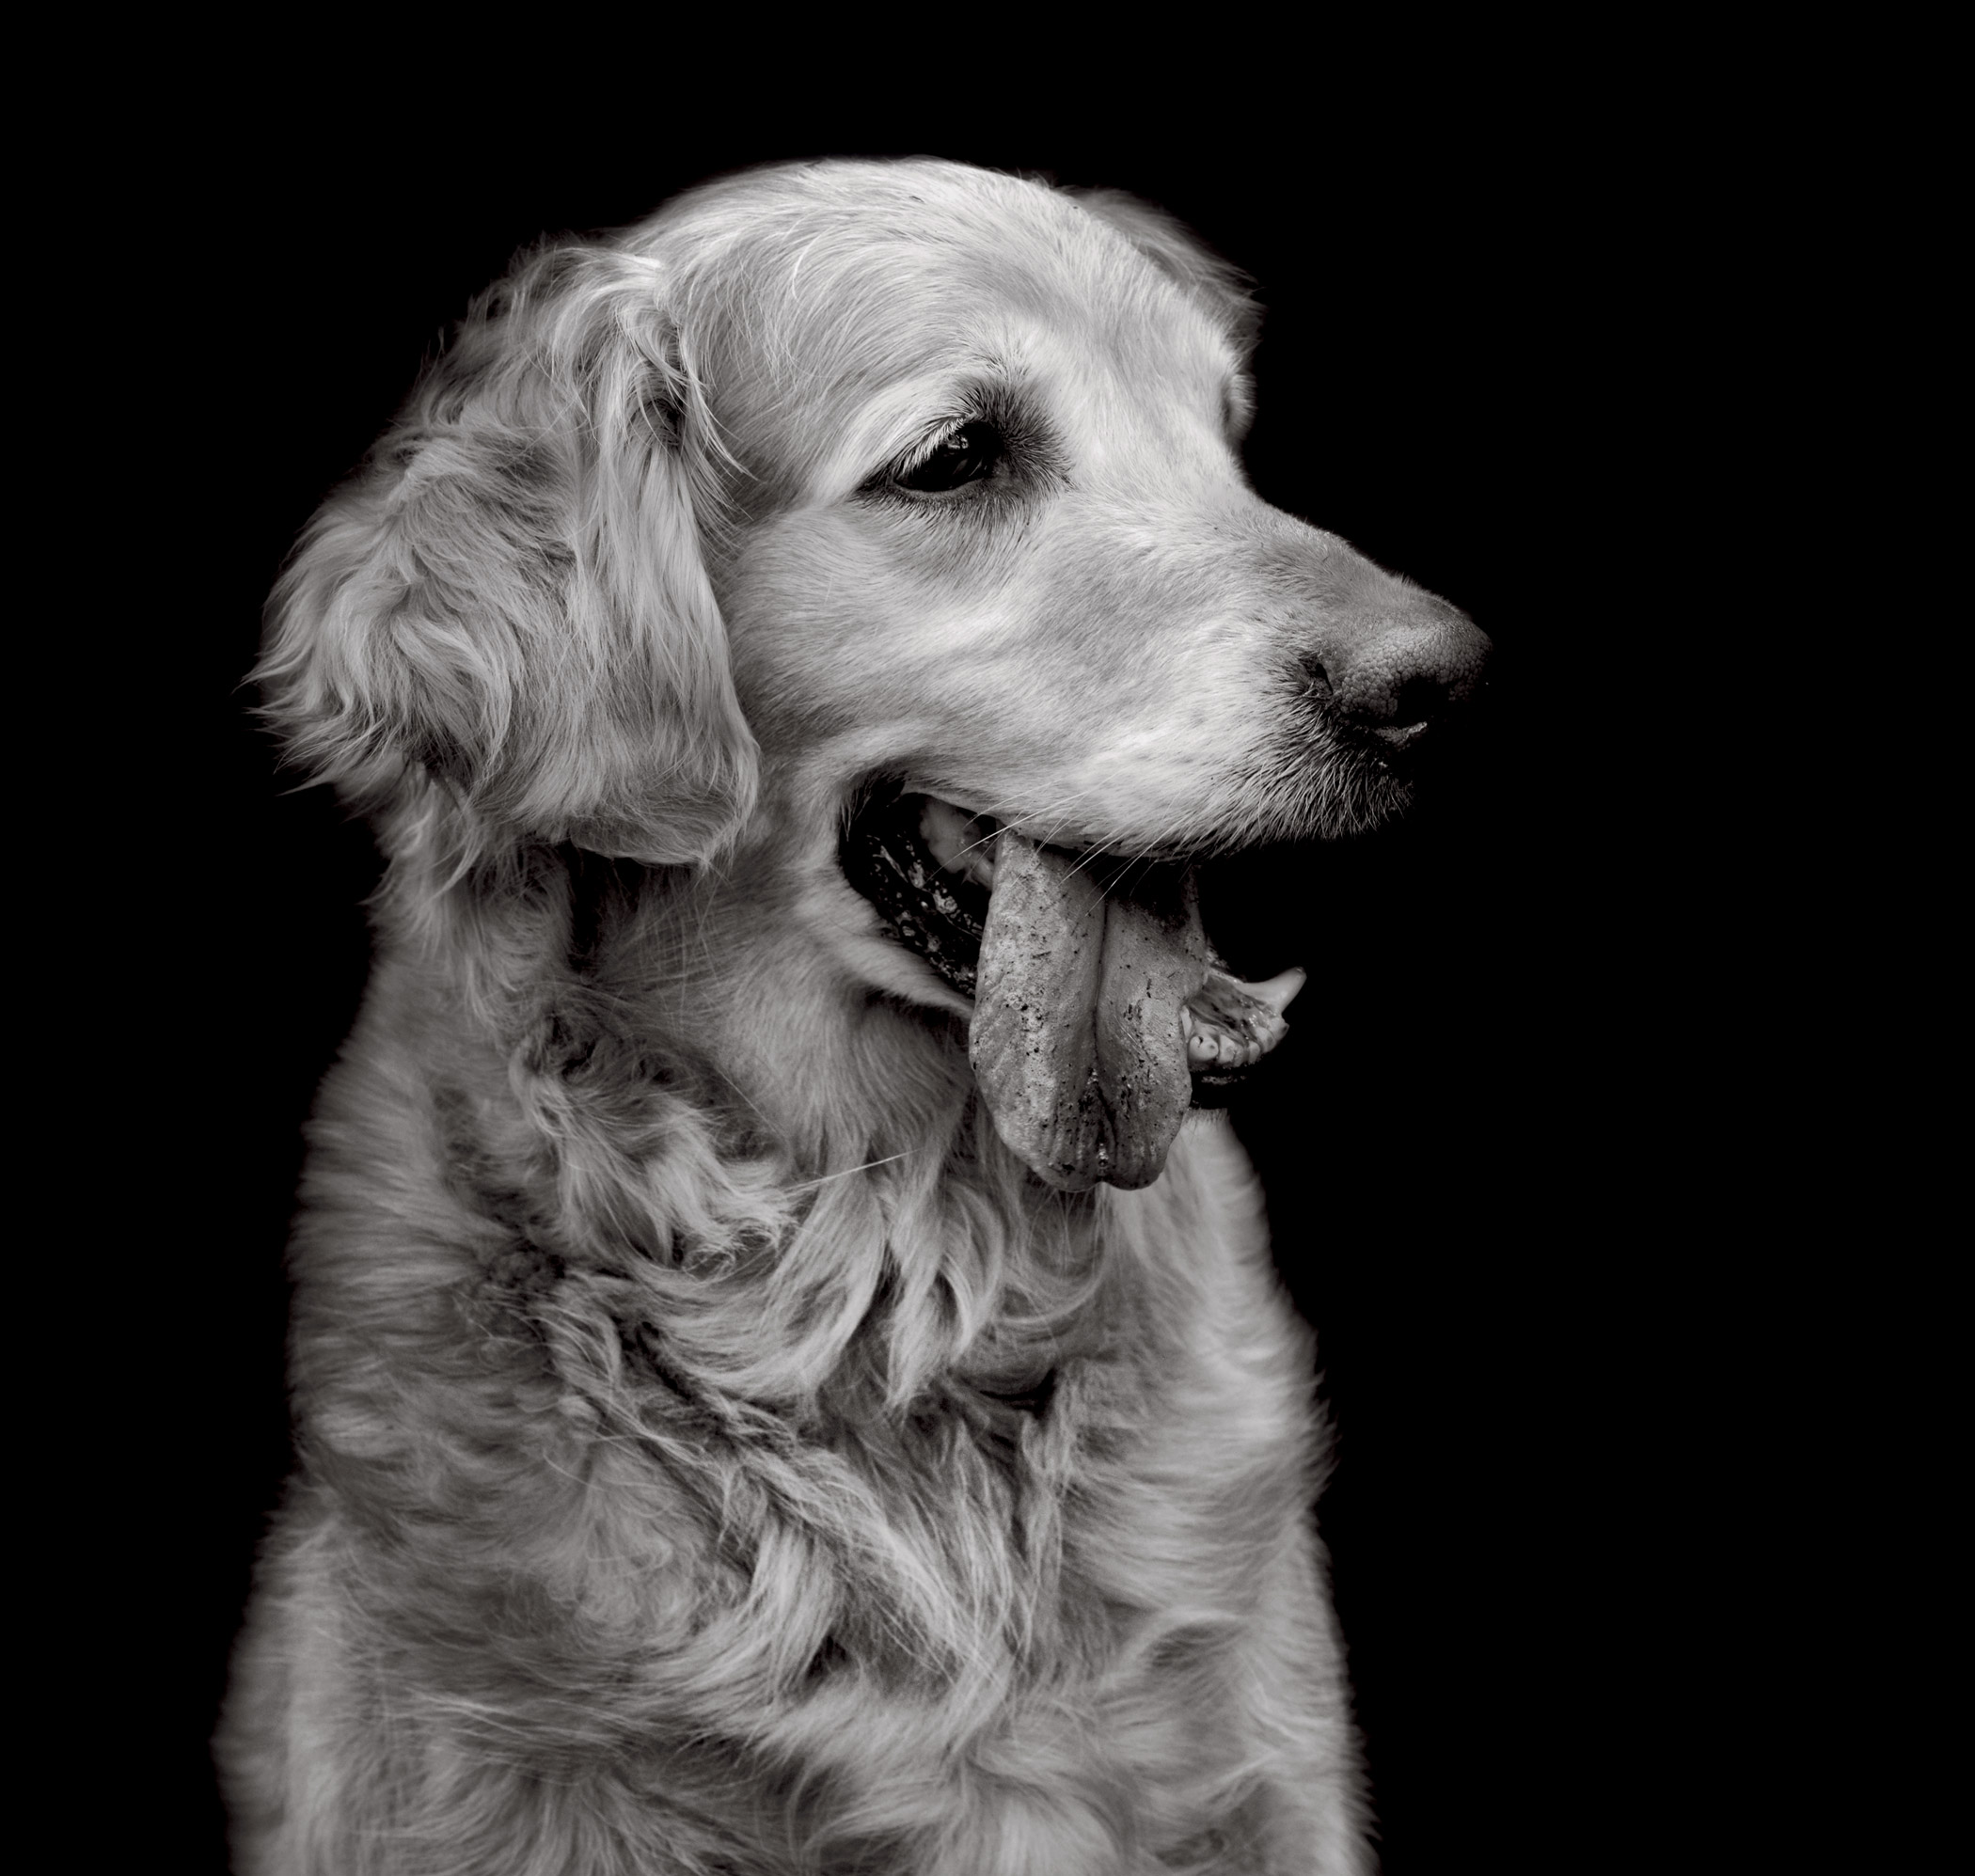 Molly is a super-affectionate senior golden retriever who was separated from her owner of ten years after the woman was forced to move into elderly housing that did not allow pets.